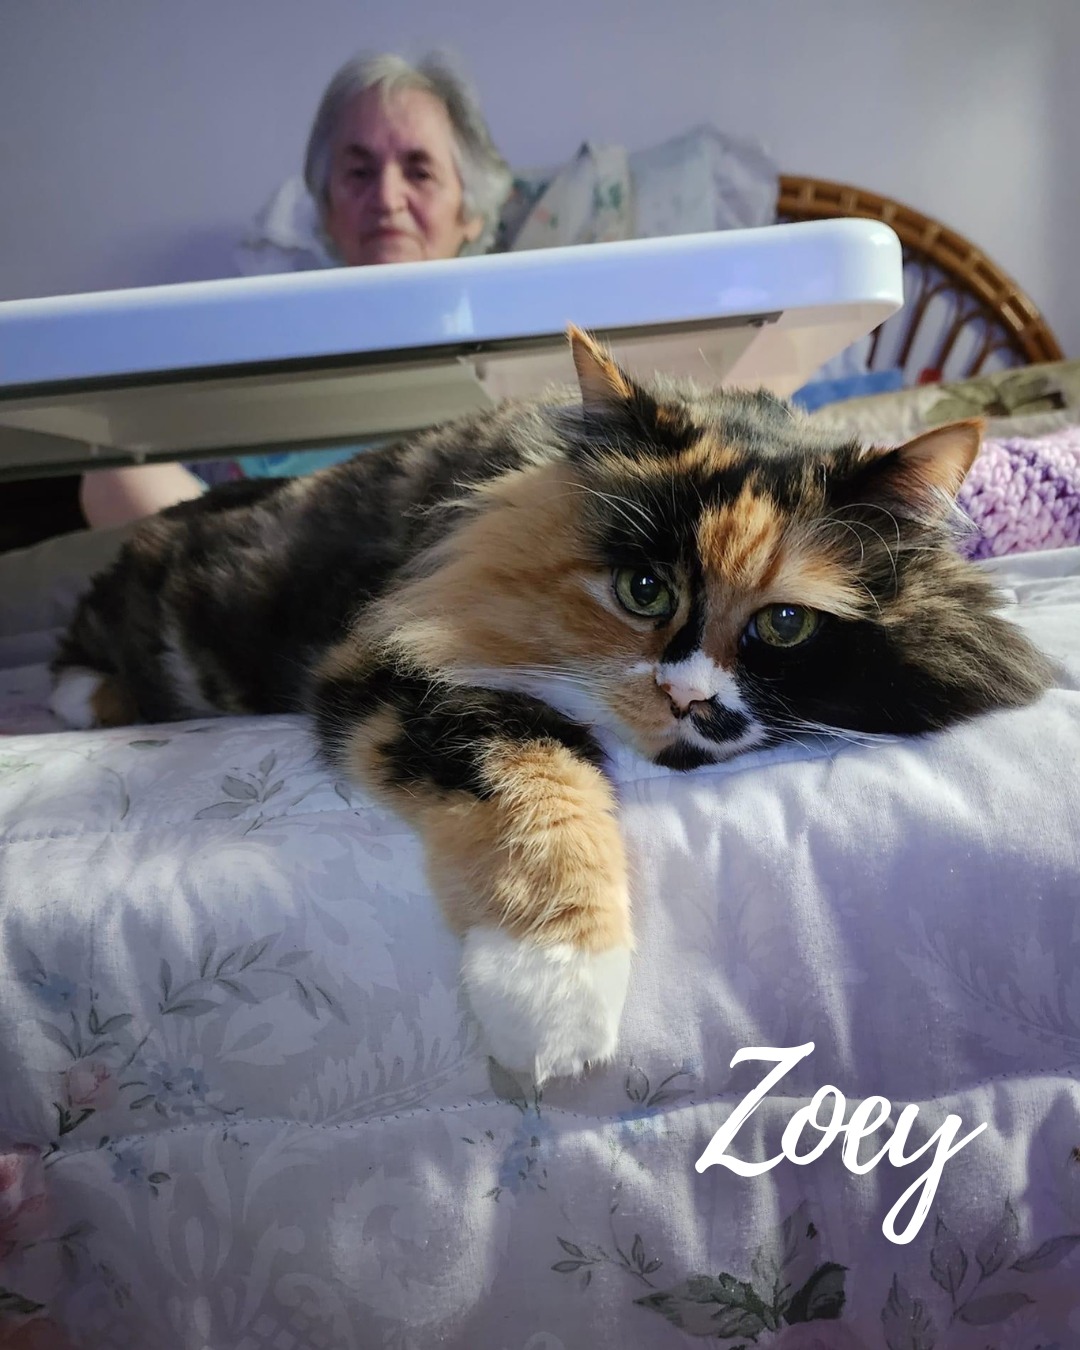 Zoey the calico cat lounging on her owner's bed.